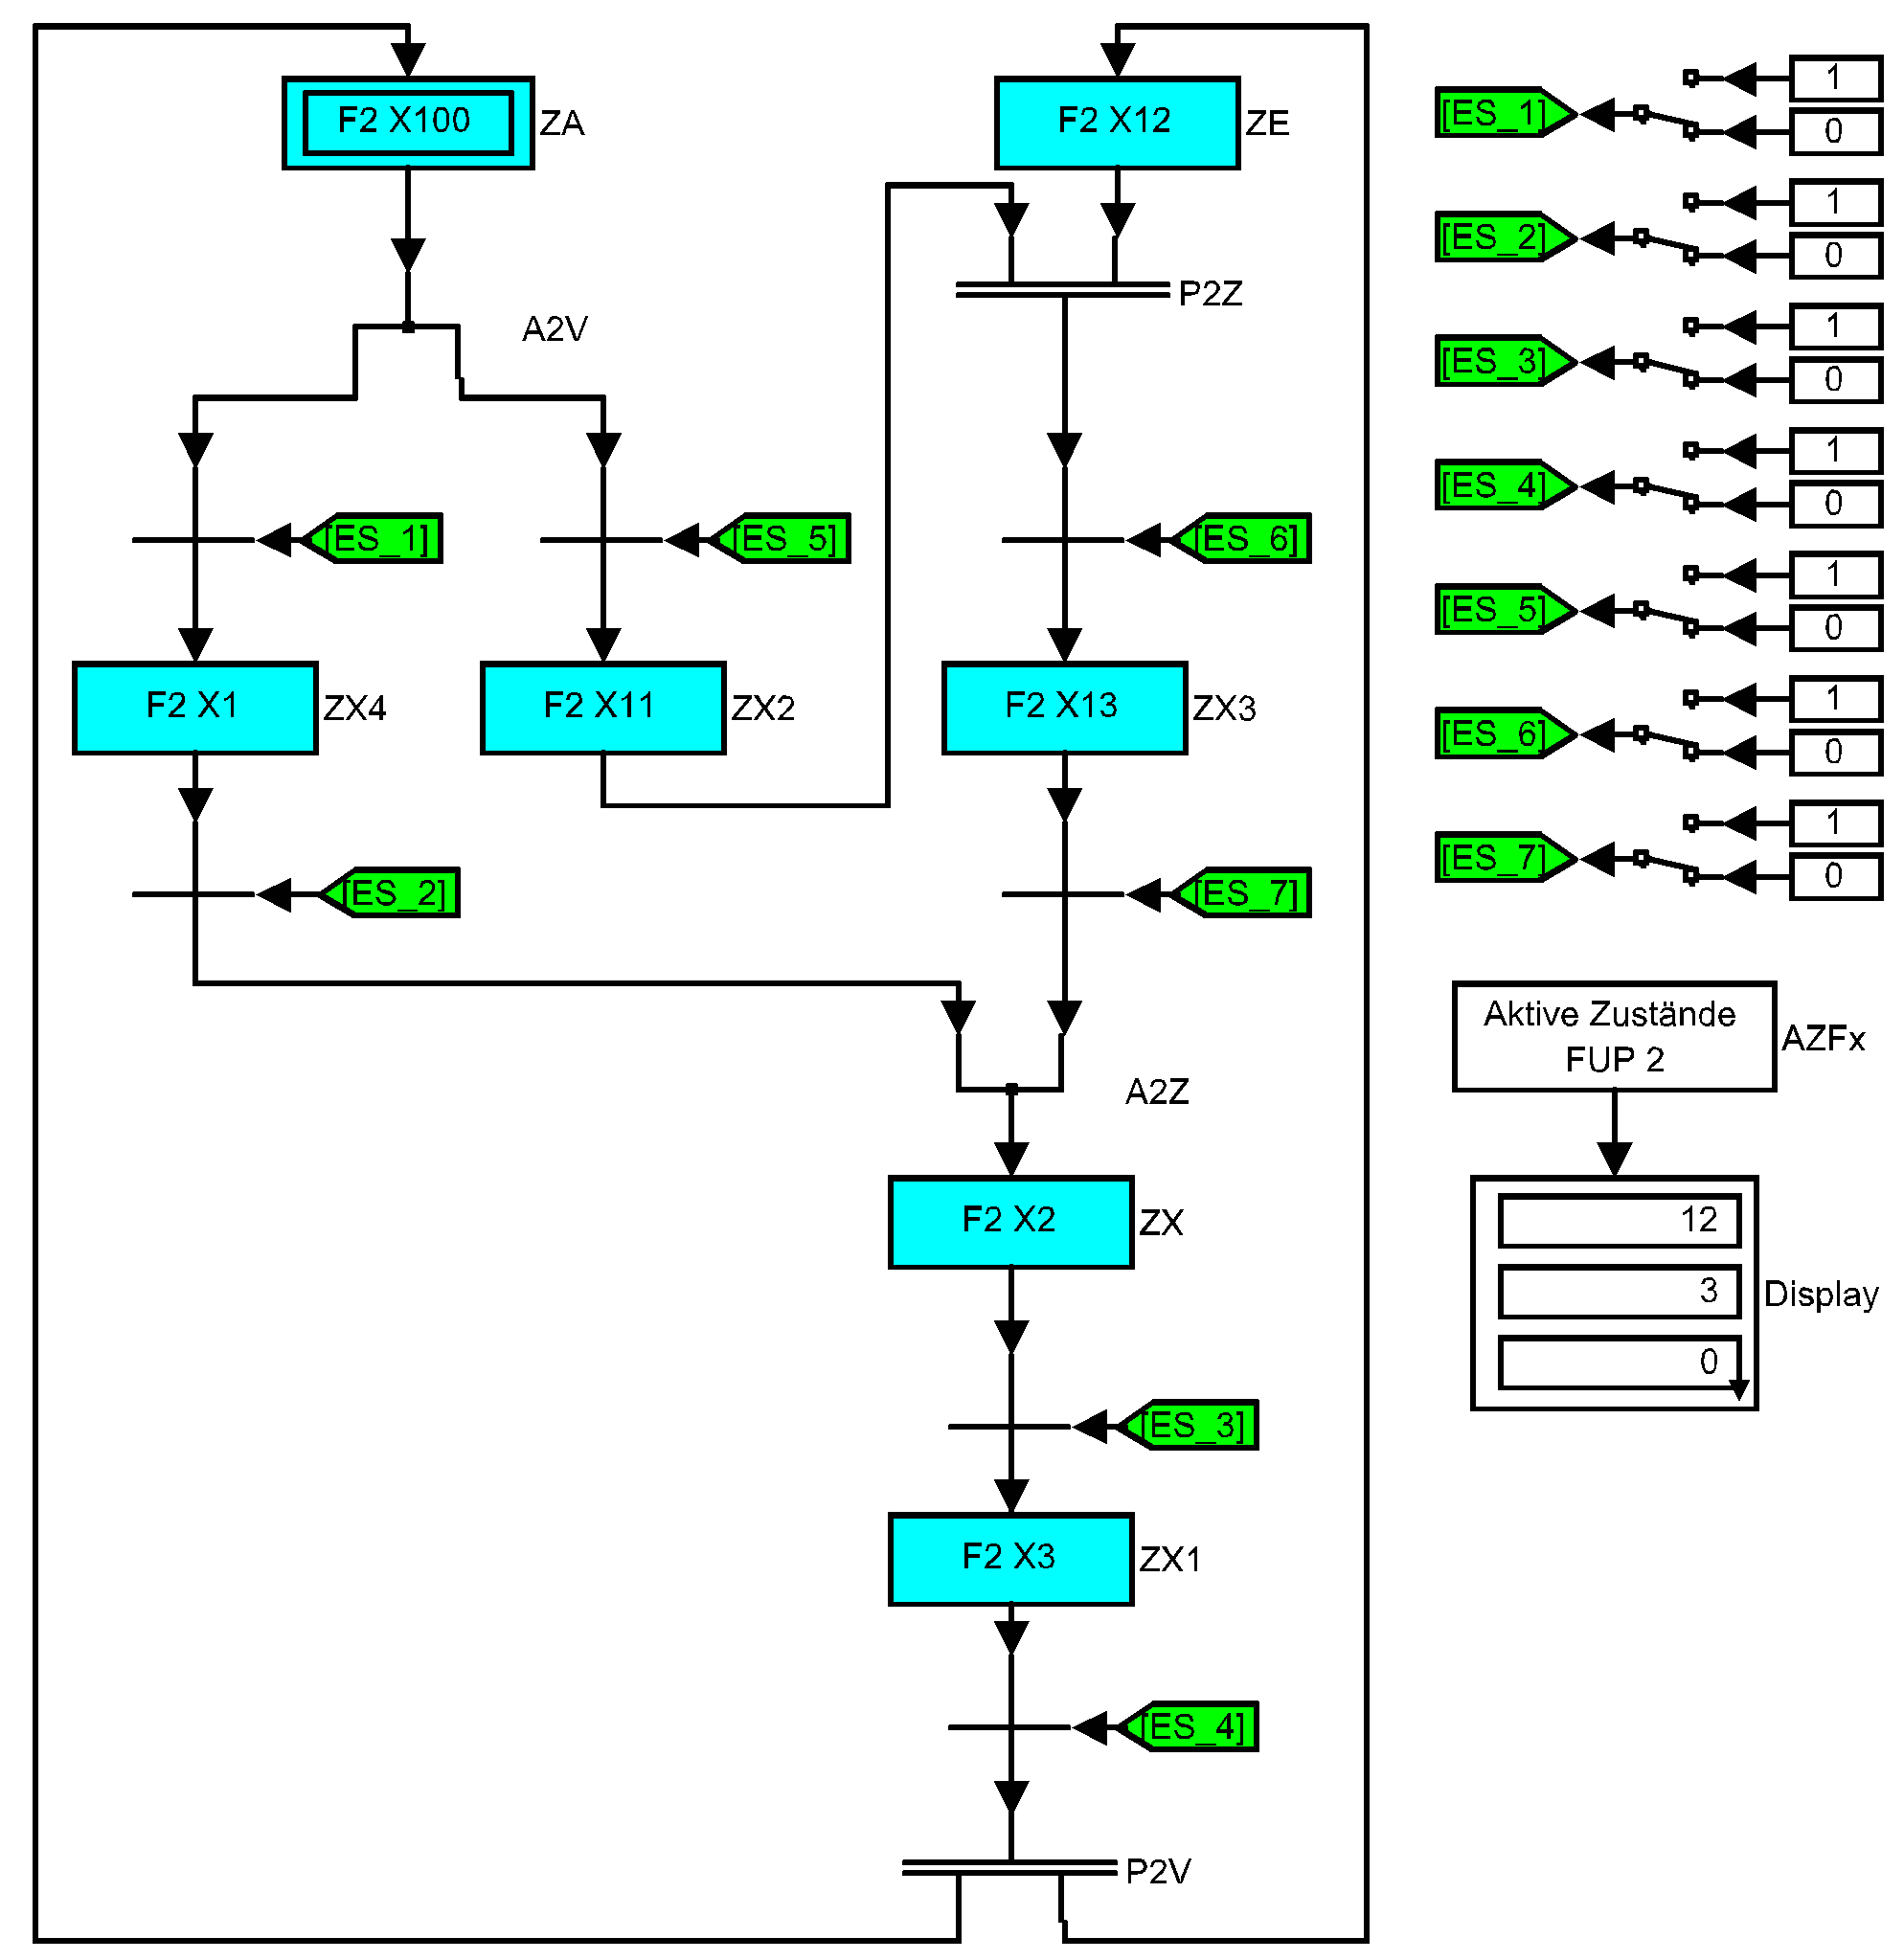 Example 4: Parallel branching with ZE block